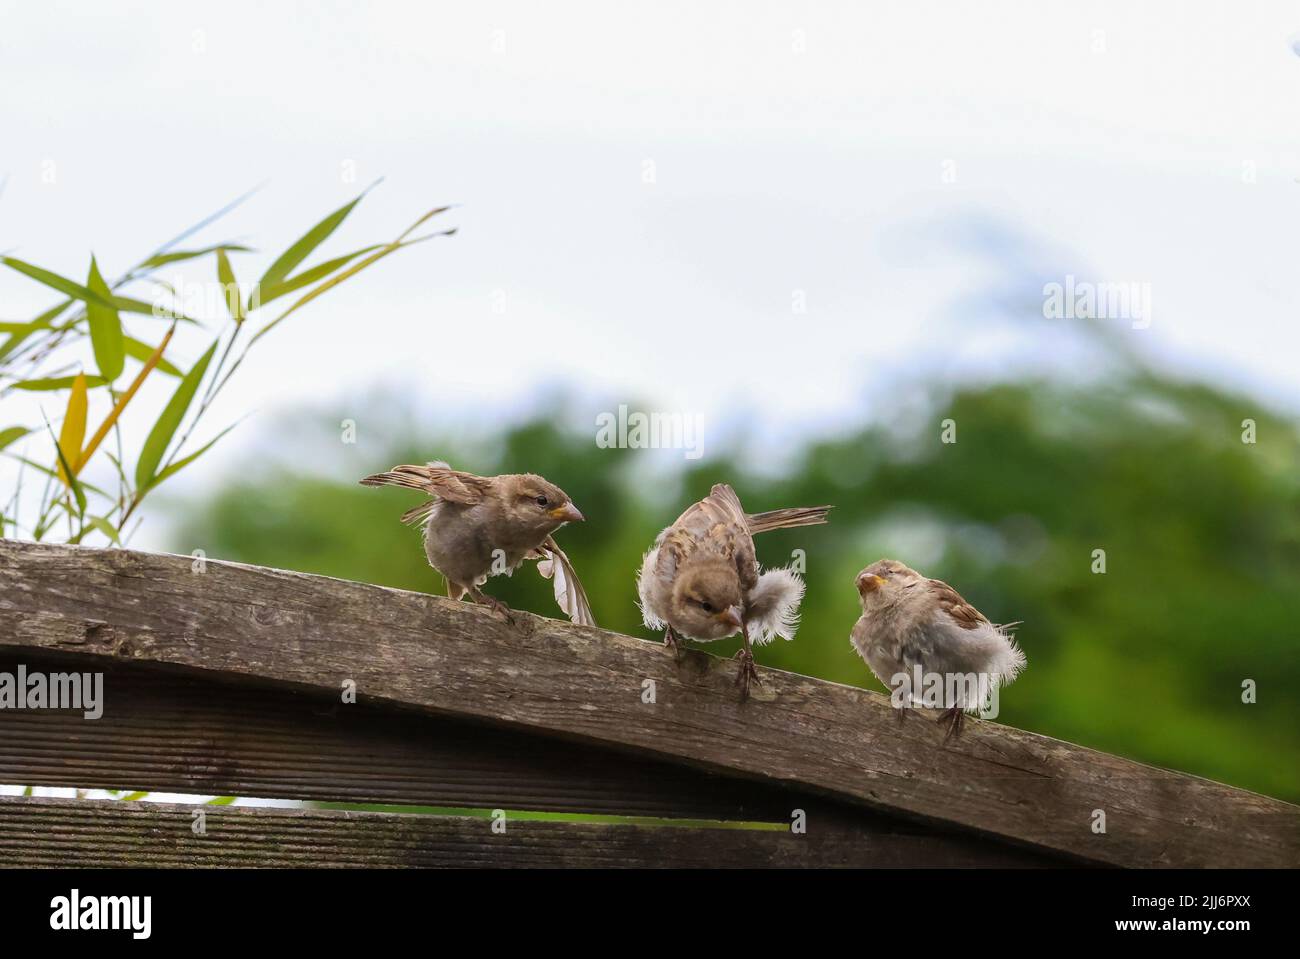 Three baby birds on fence with fluffy feathers learning to fly. Cute fledgling House Sparrow chicks 'Passer Domesticus'. Dublin, Ireland Stock Photo